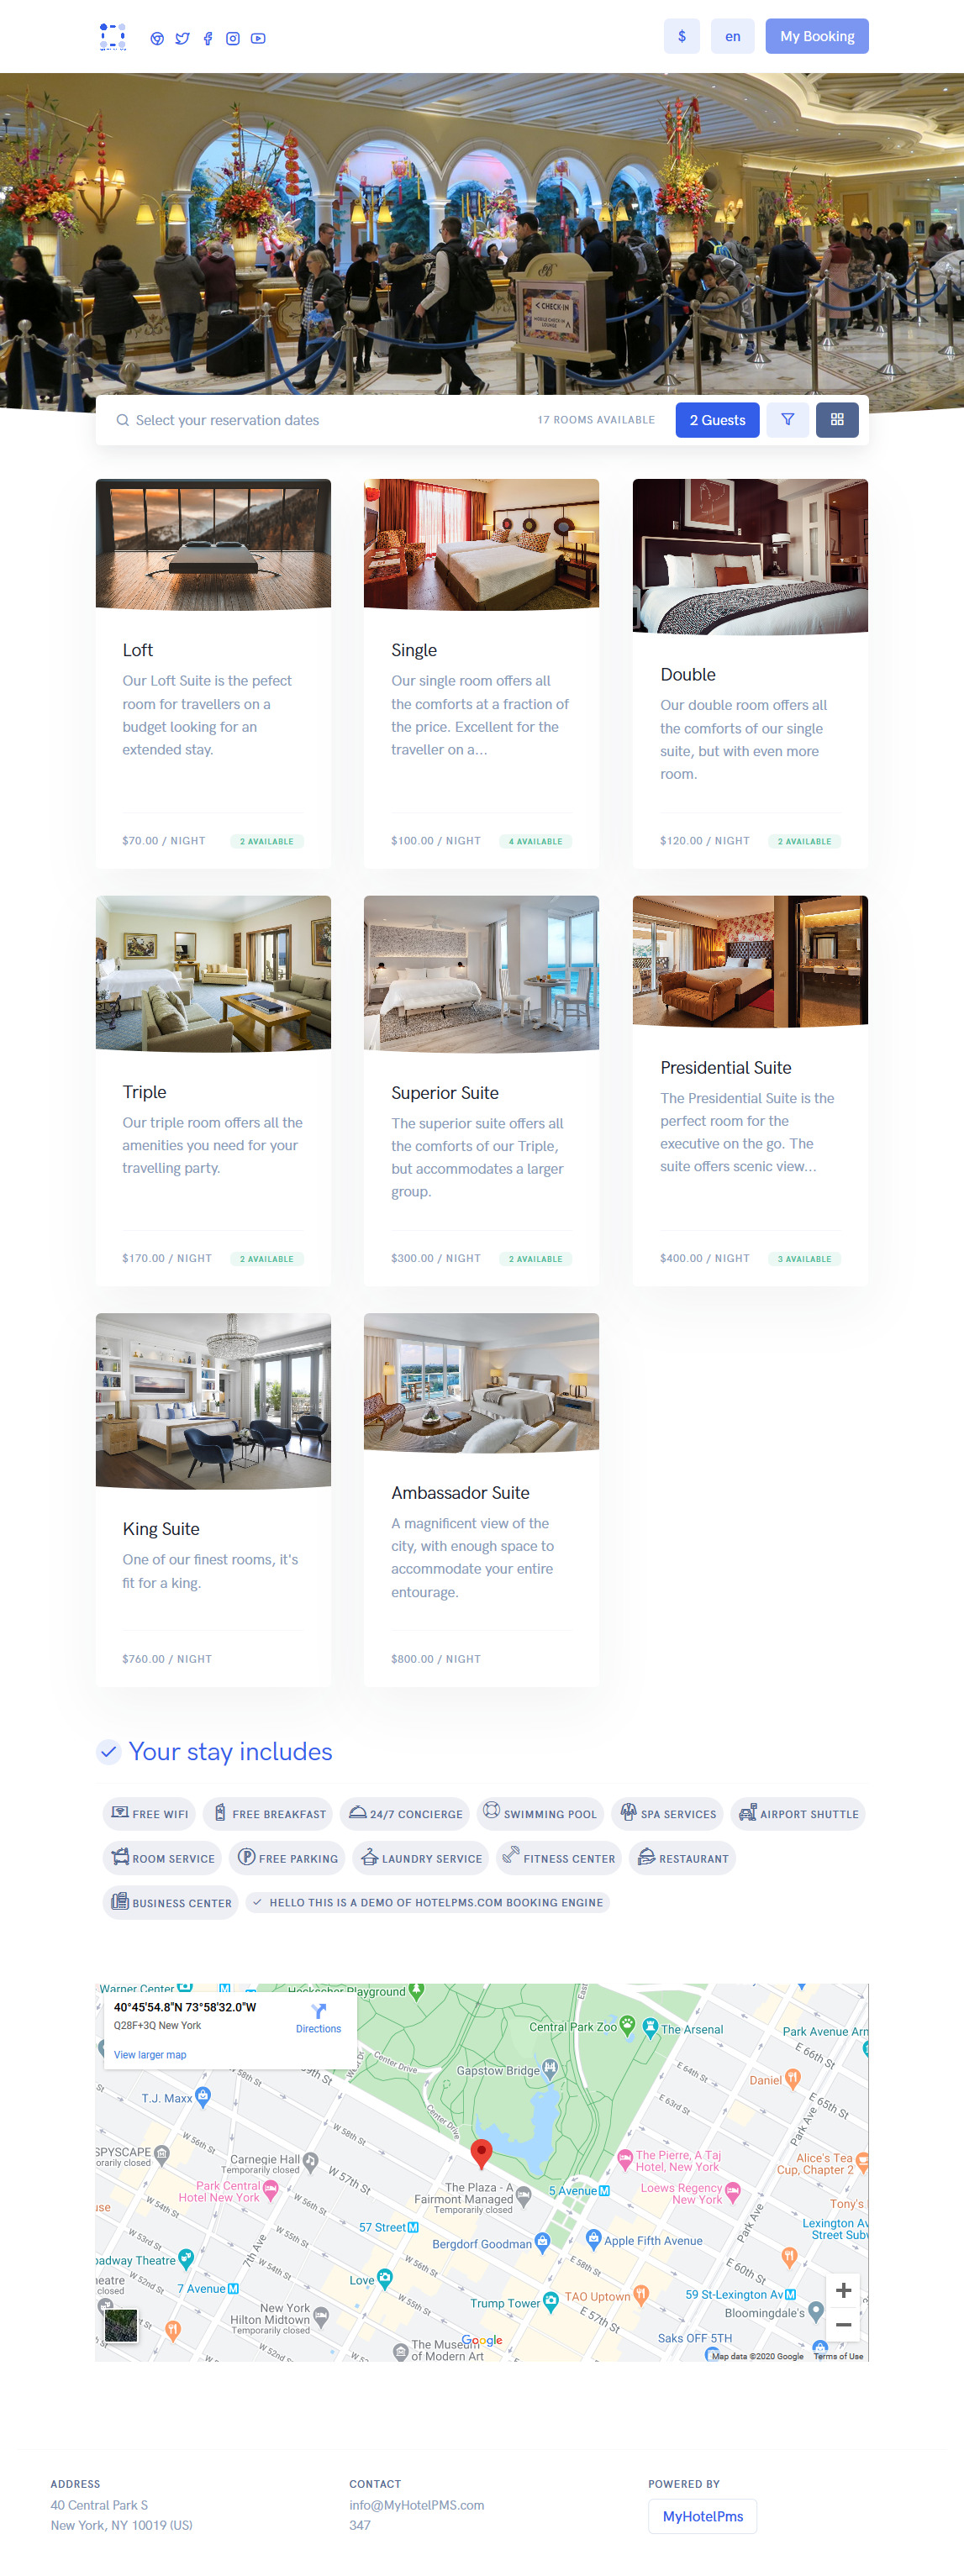 Google Hotel Ads | Google Hotel Ads‎ Drive More Hotel Bookings Reservations with Ads for Your Hotel platform engineered to Growth your Online Hospitality Business includes Front Desk System + Direct Booking Engine + Channel Manager + Payment Gateway + Housekeeping